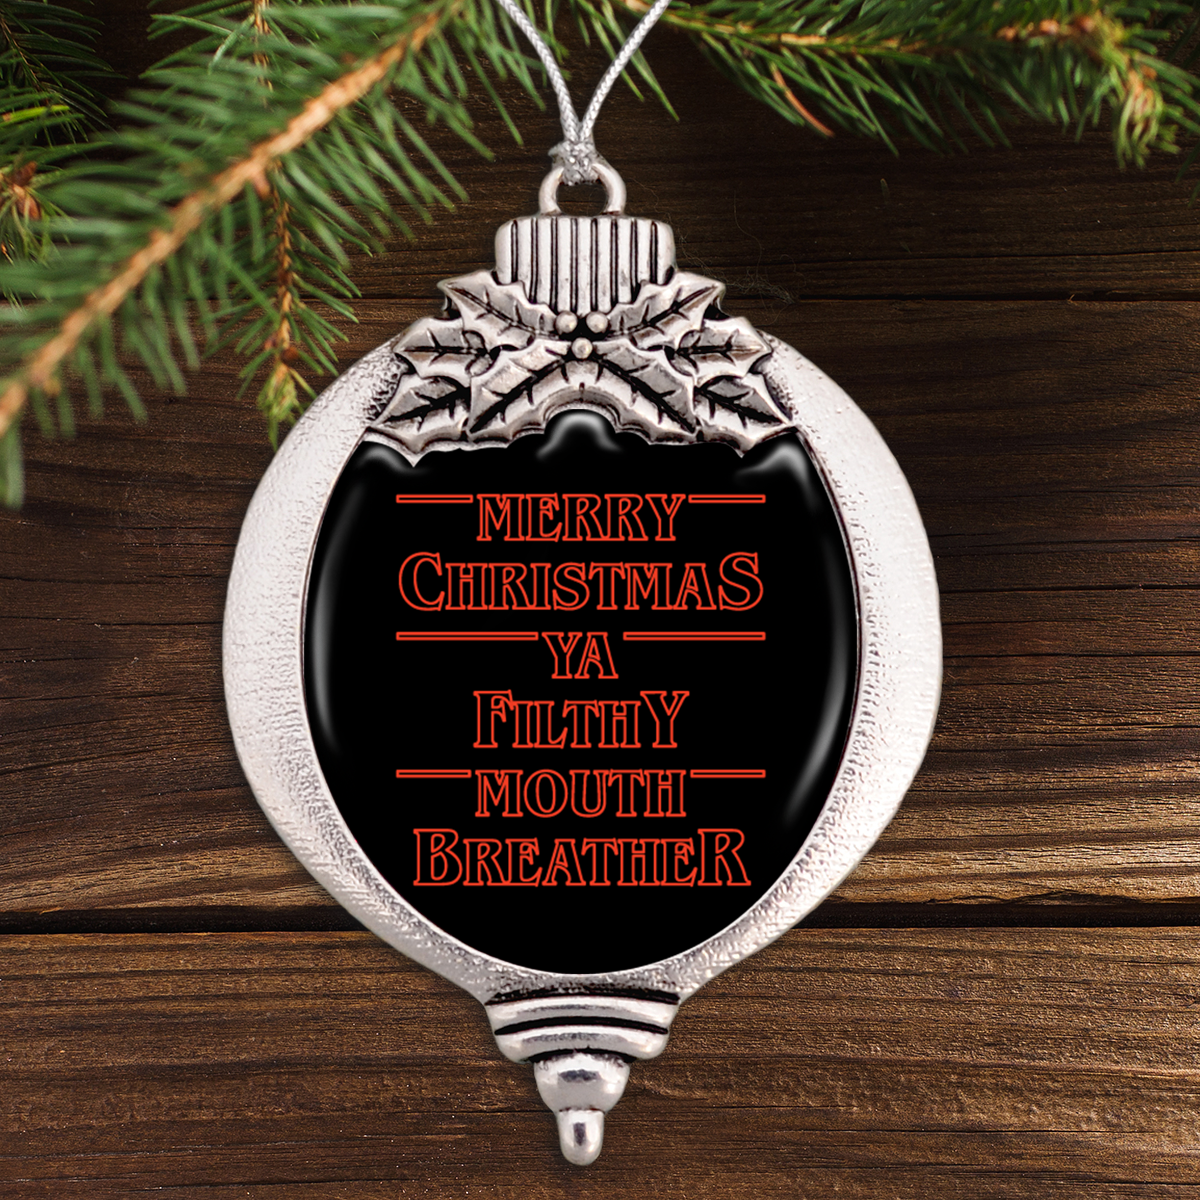 Merry Christmas Ya Filthy Mouth Breather Bulb Ornament